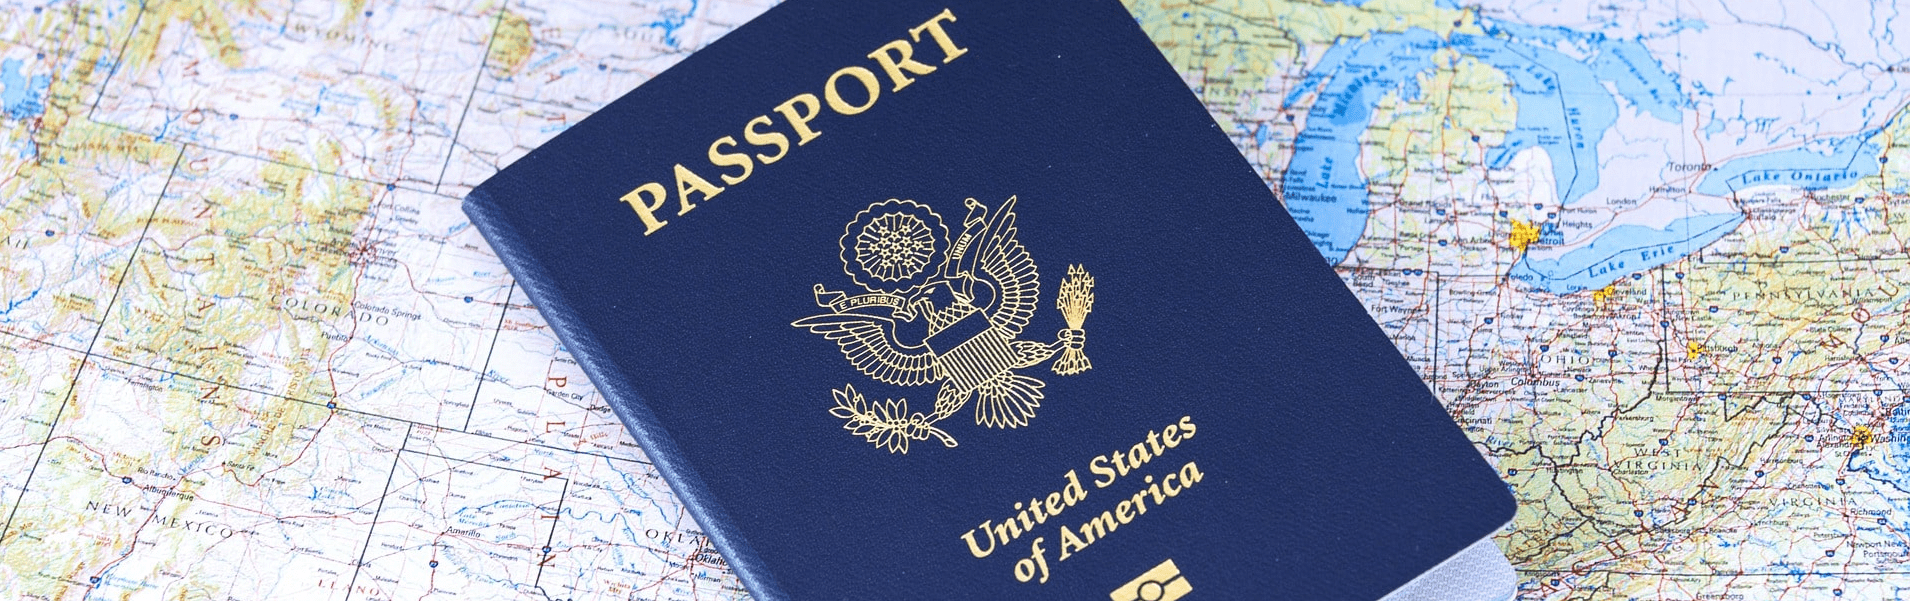 A U.S. passport lies on a map of the United States